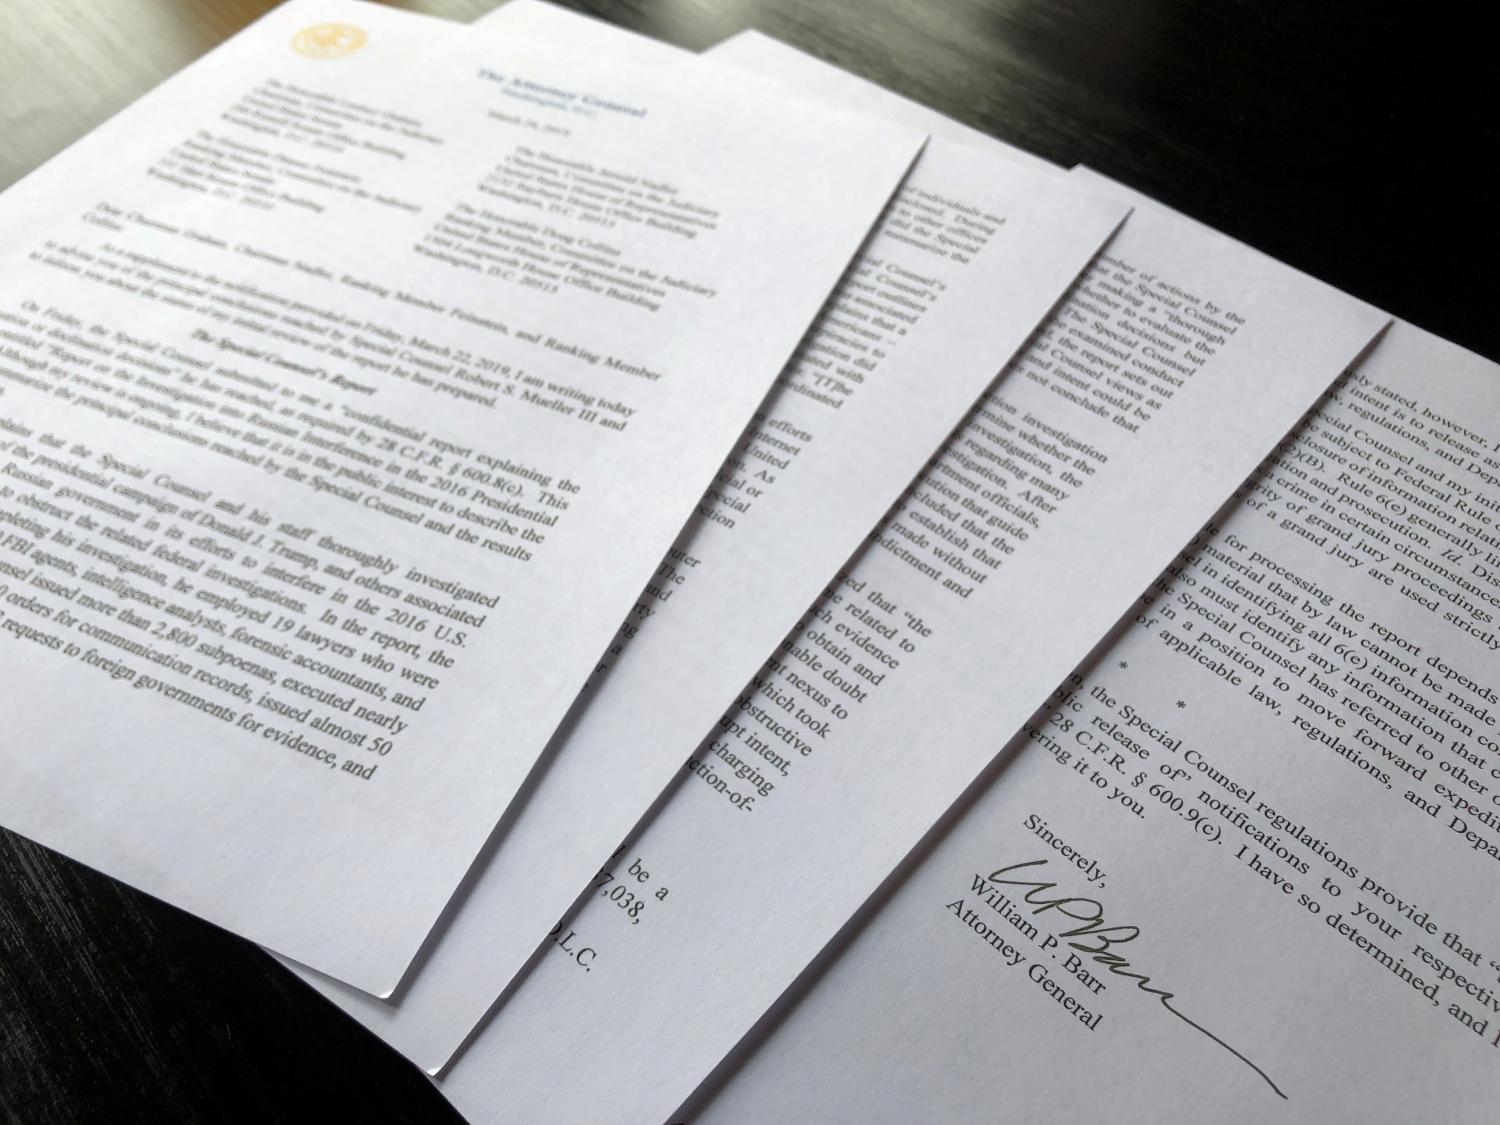 U.S. Attorney General William Barr's signature is seen at the end of his four page letter to U.S. congressional leaders on the conclusions of Special Counsel Robert Mueller's report on Russian meddling in the 2016 election after the letter was released by the House Judiciary Committee in Washington, U.S. March 24, 2019. REUTERS/Jim Bourg     TPX IMAGES OF THE DAY - RC1B4EB05810